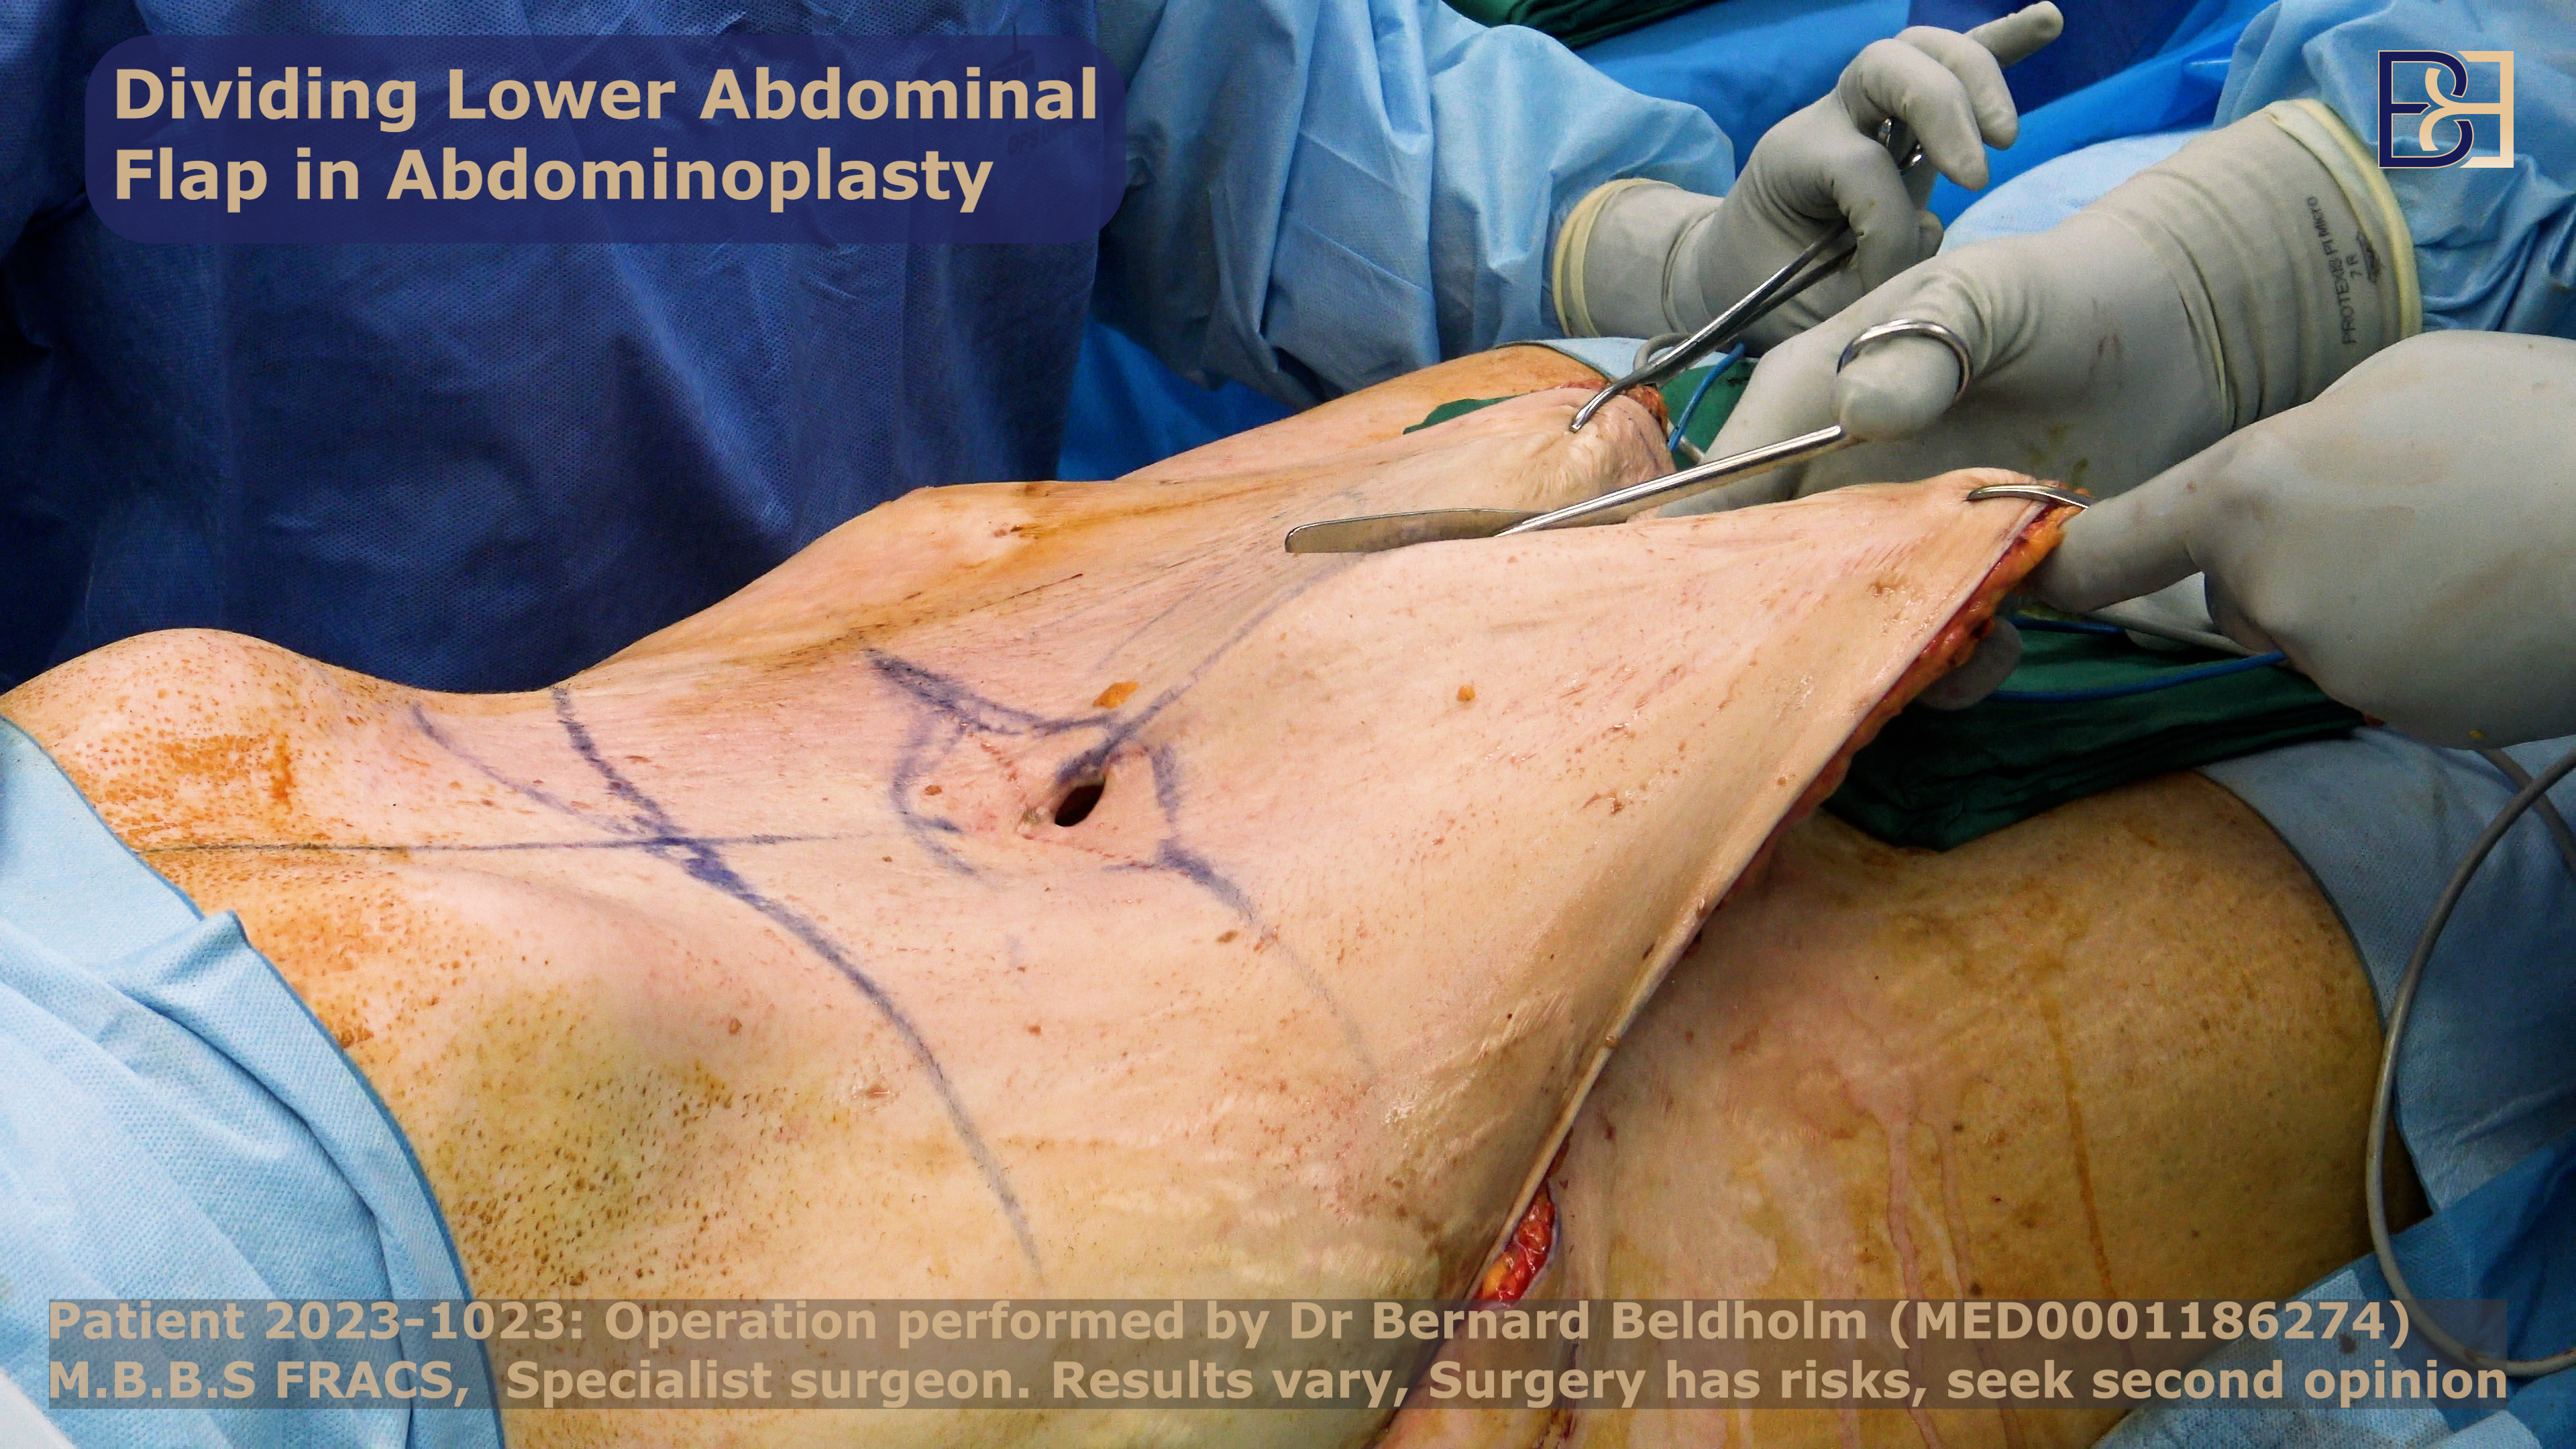 Surgeon removes excess skin and underlying tissue during abdominoplasty procedures